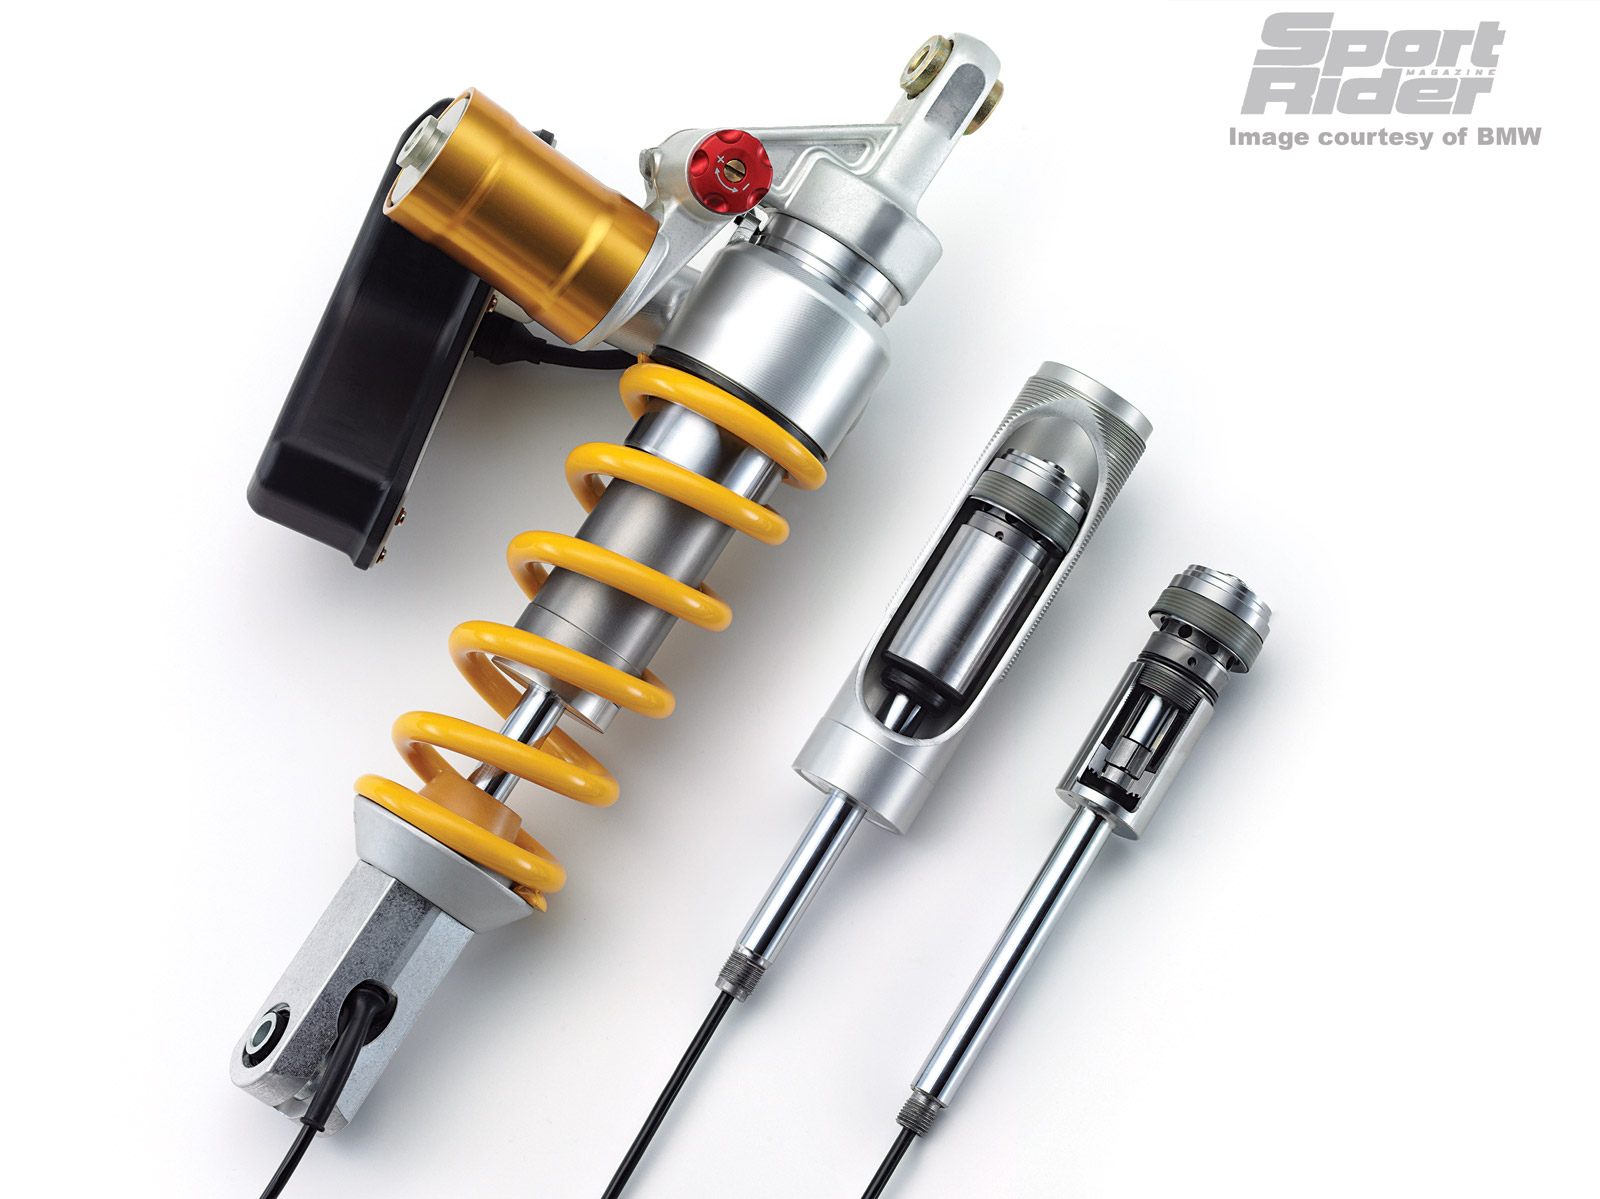 Shock Absorber Systems